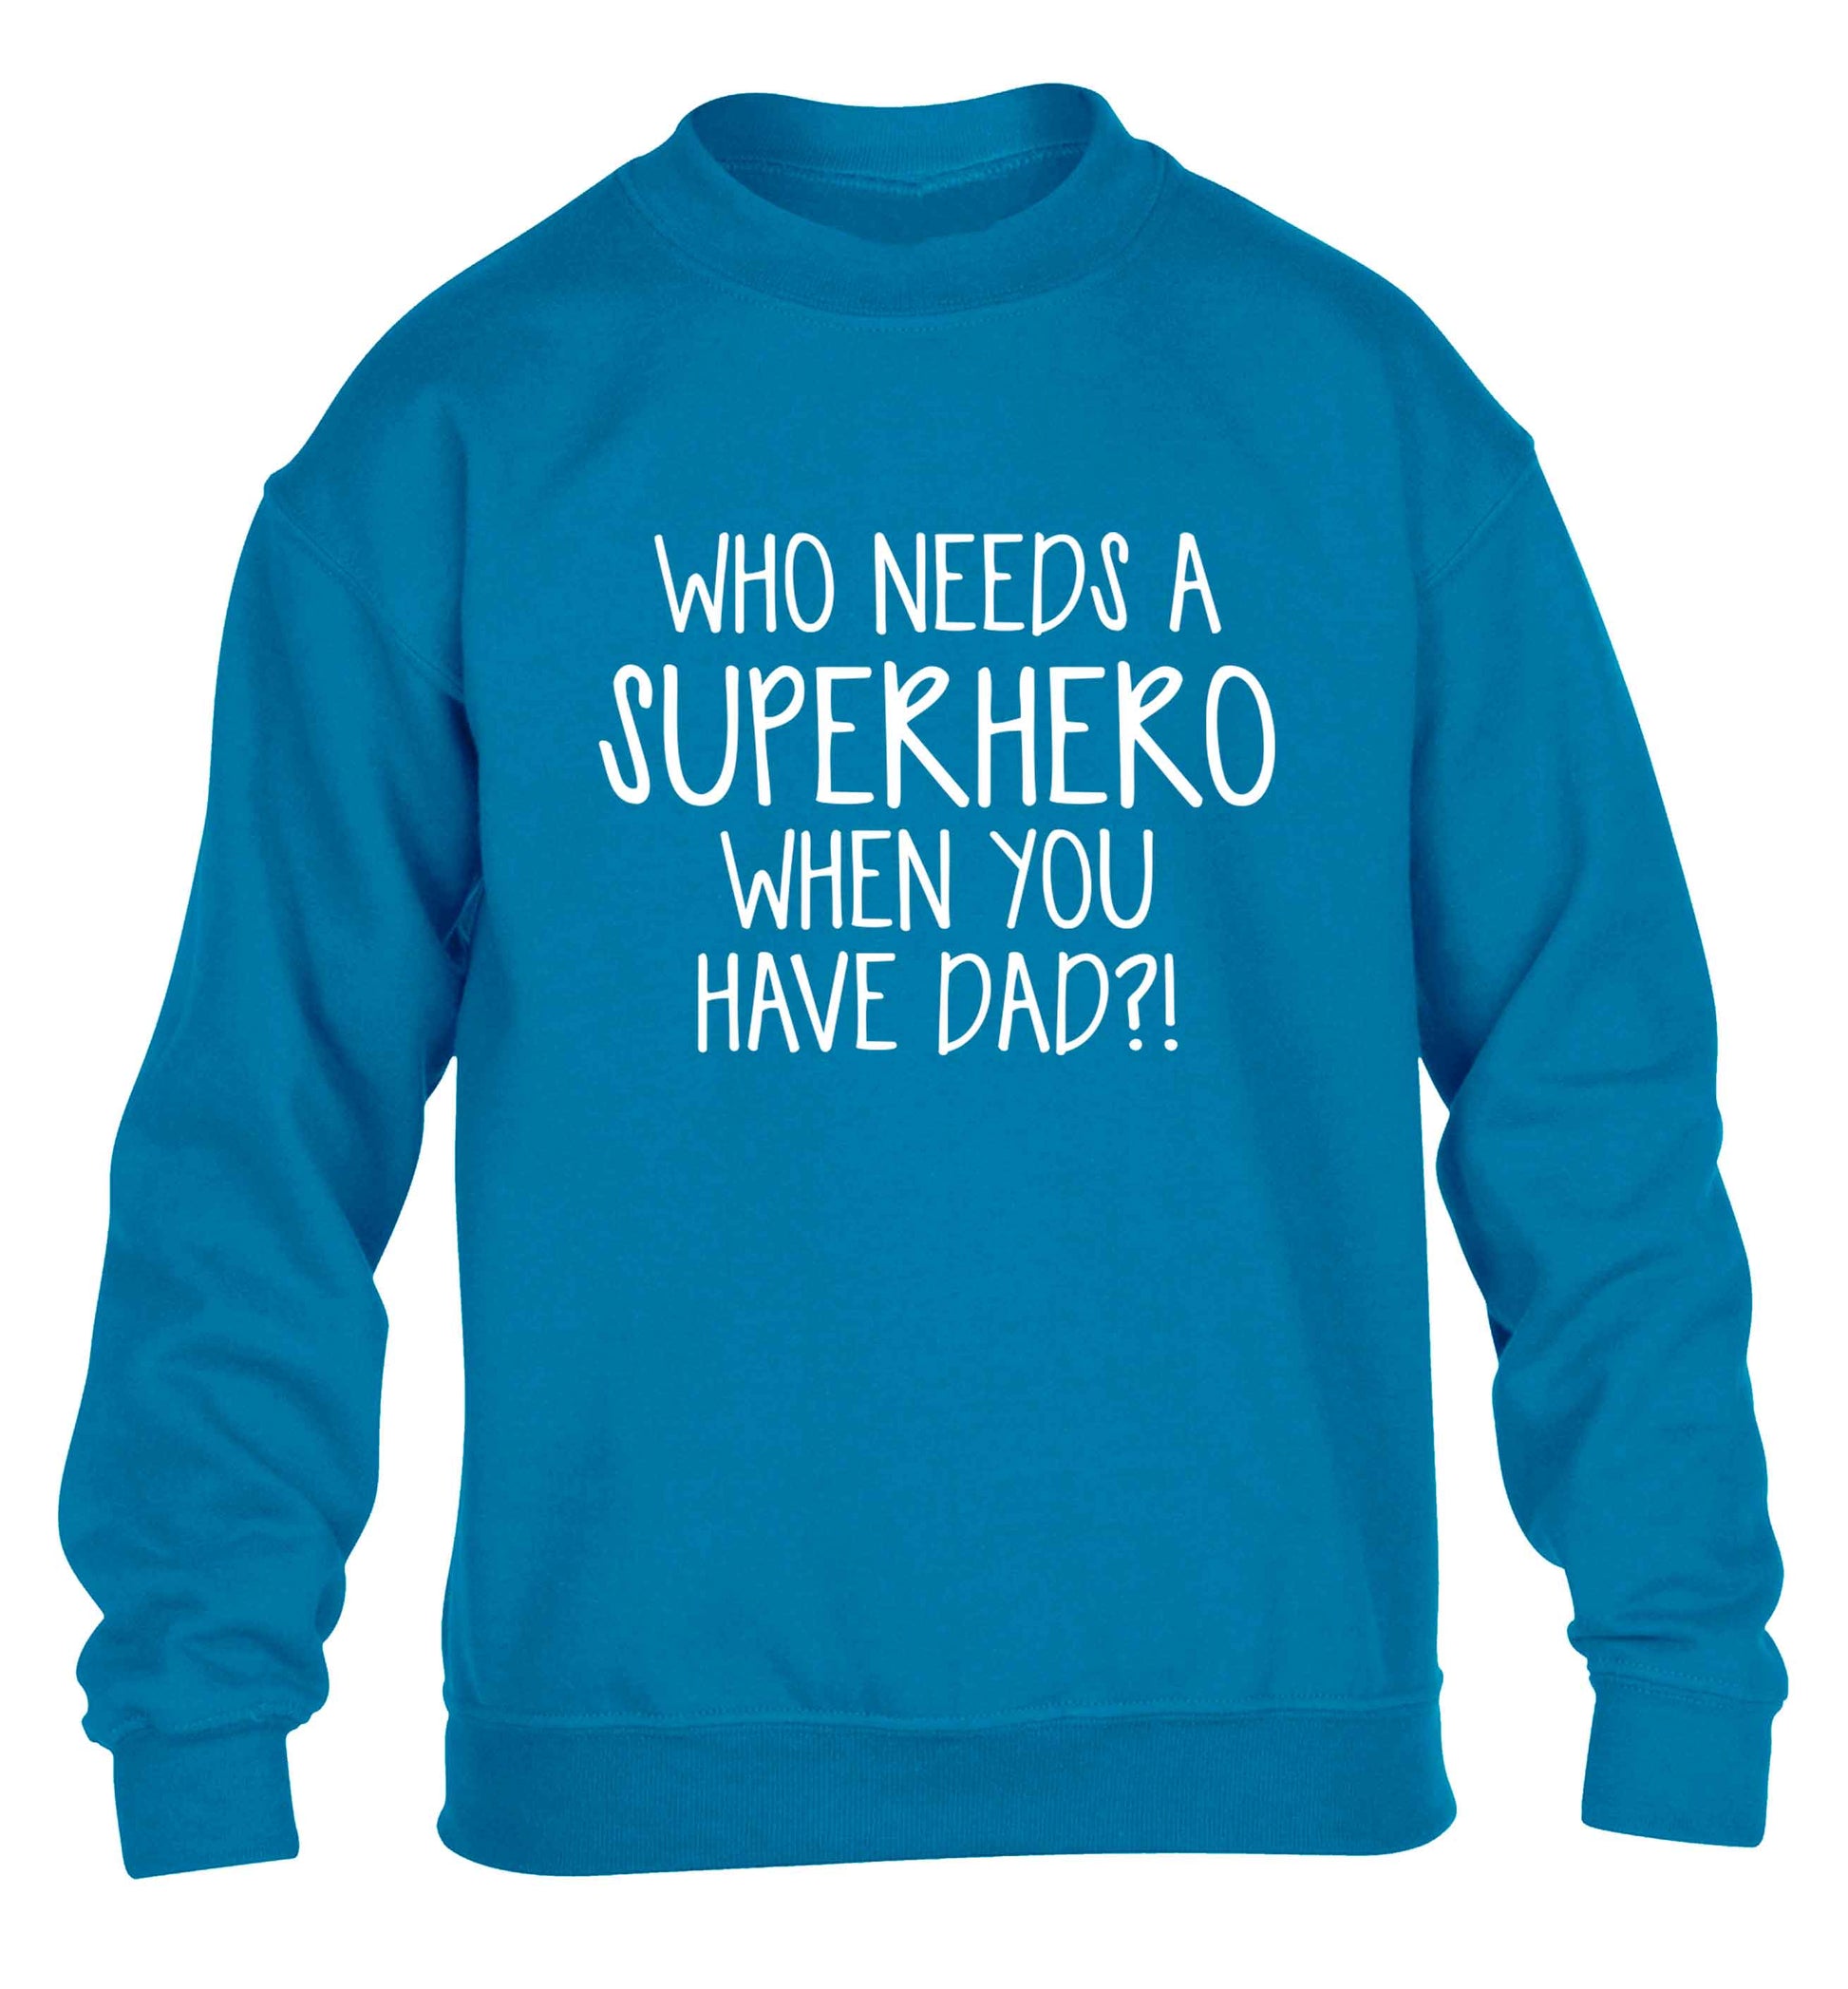 Who needs a superhero when you have dad! children's blue sweater 12-13 Years